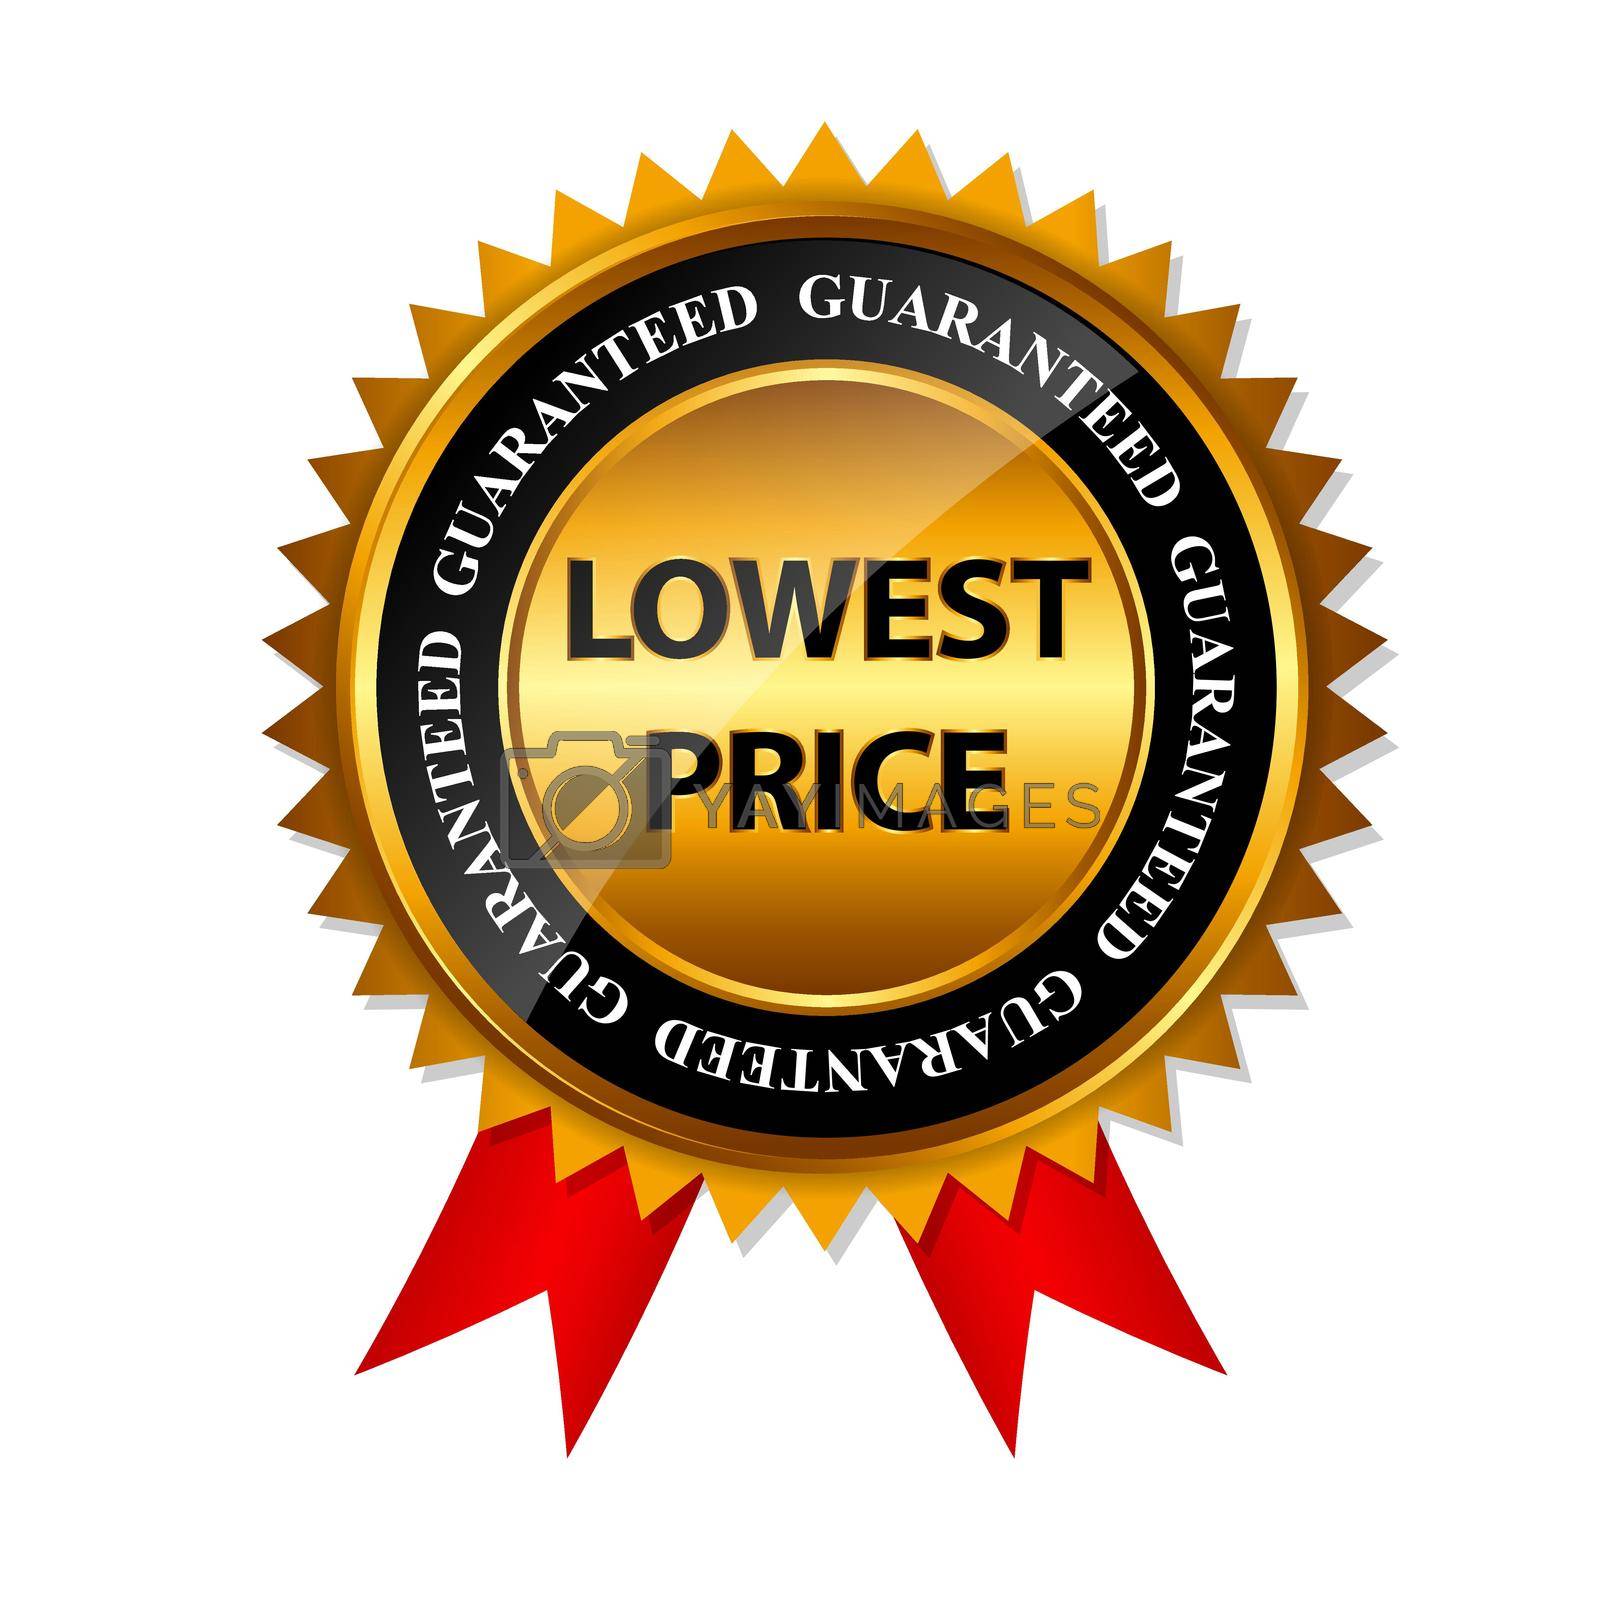 Royalty free image of Lowest Price Guarantee Gold Label Sign Template Vector Illustration by yganko